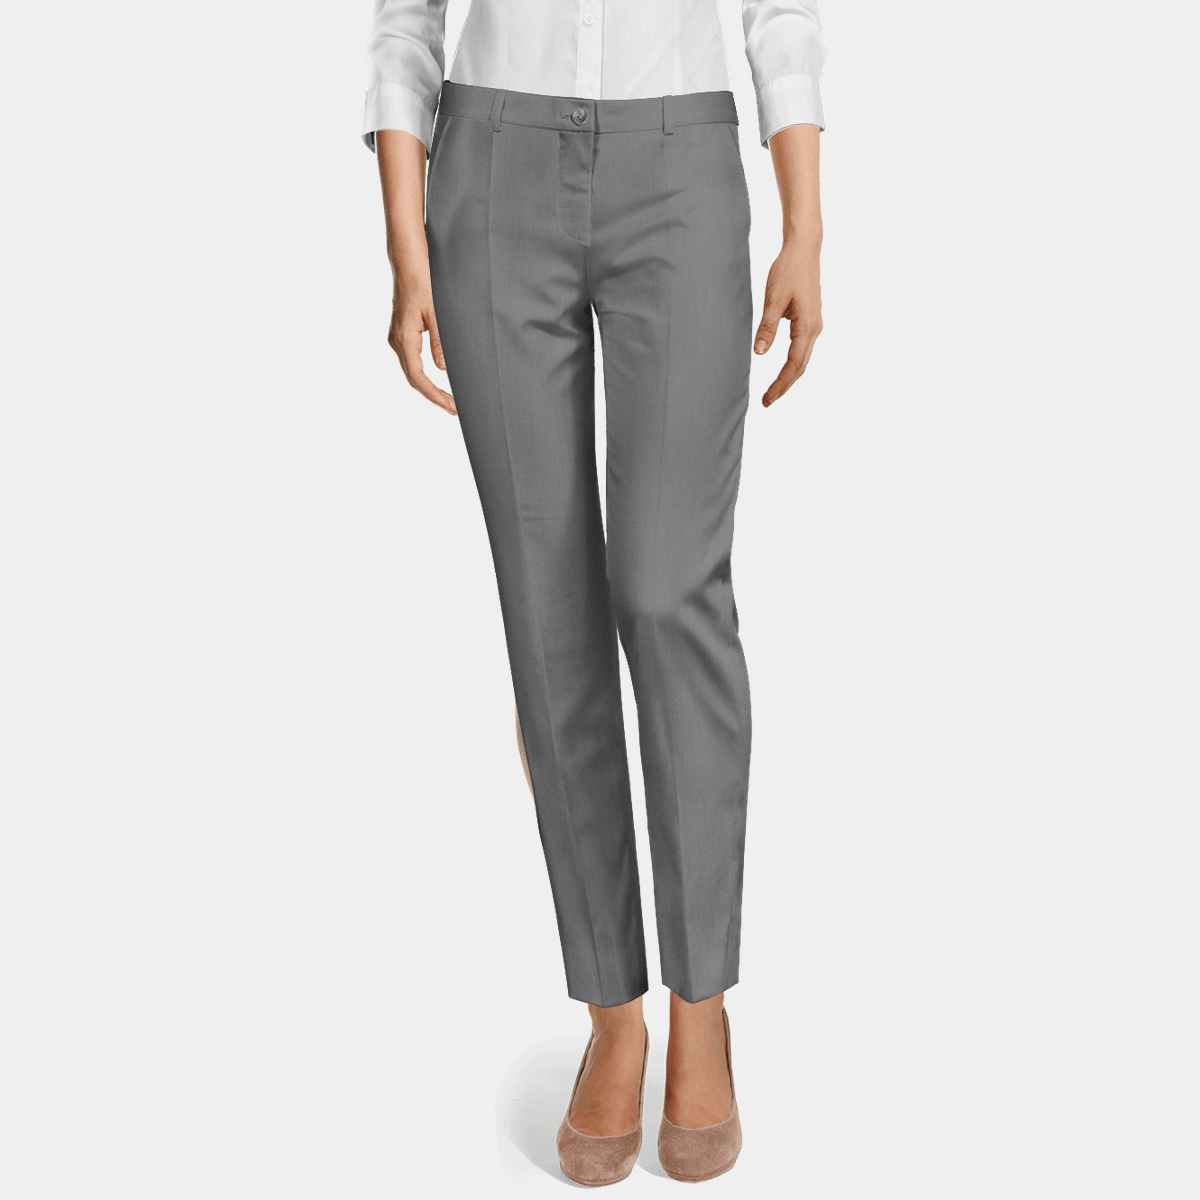 Iron grey flat-front year-round Cigarette Pants